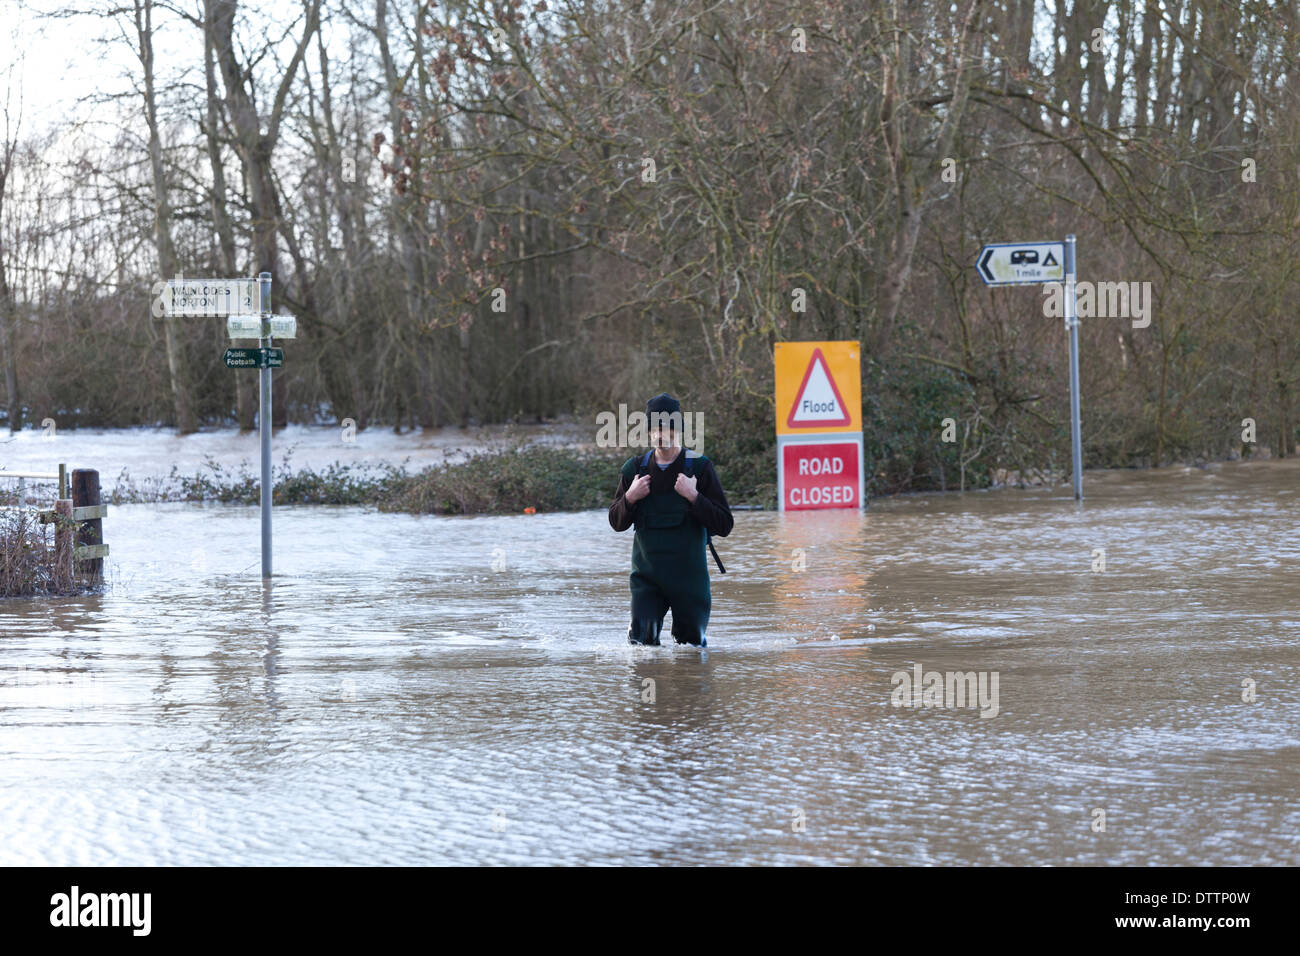 Ex-soldier walking through floodwaters at Apperley, Gloucestershire UK to deliver supplies and medication to a sick friend. Stock Photo